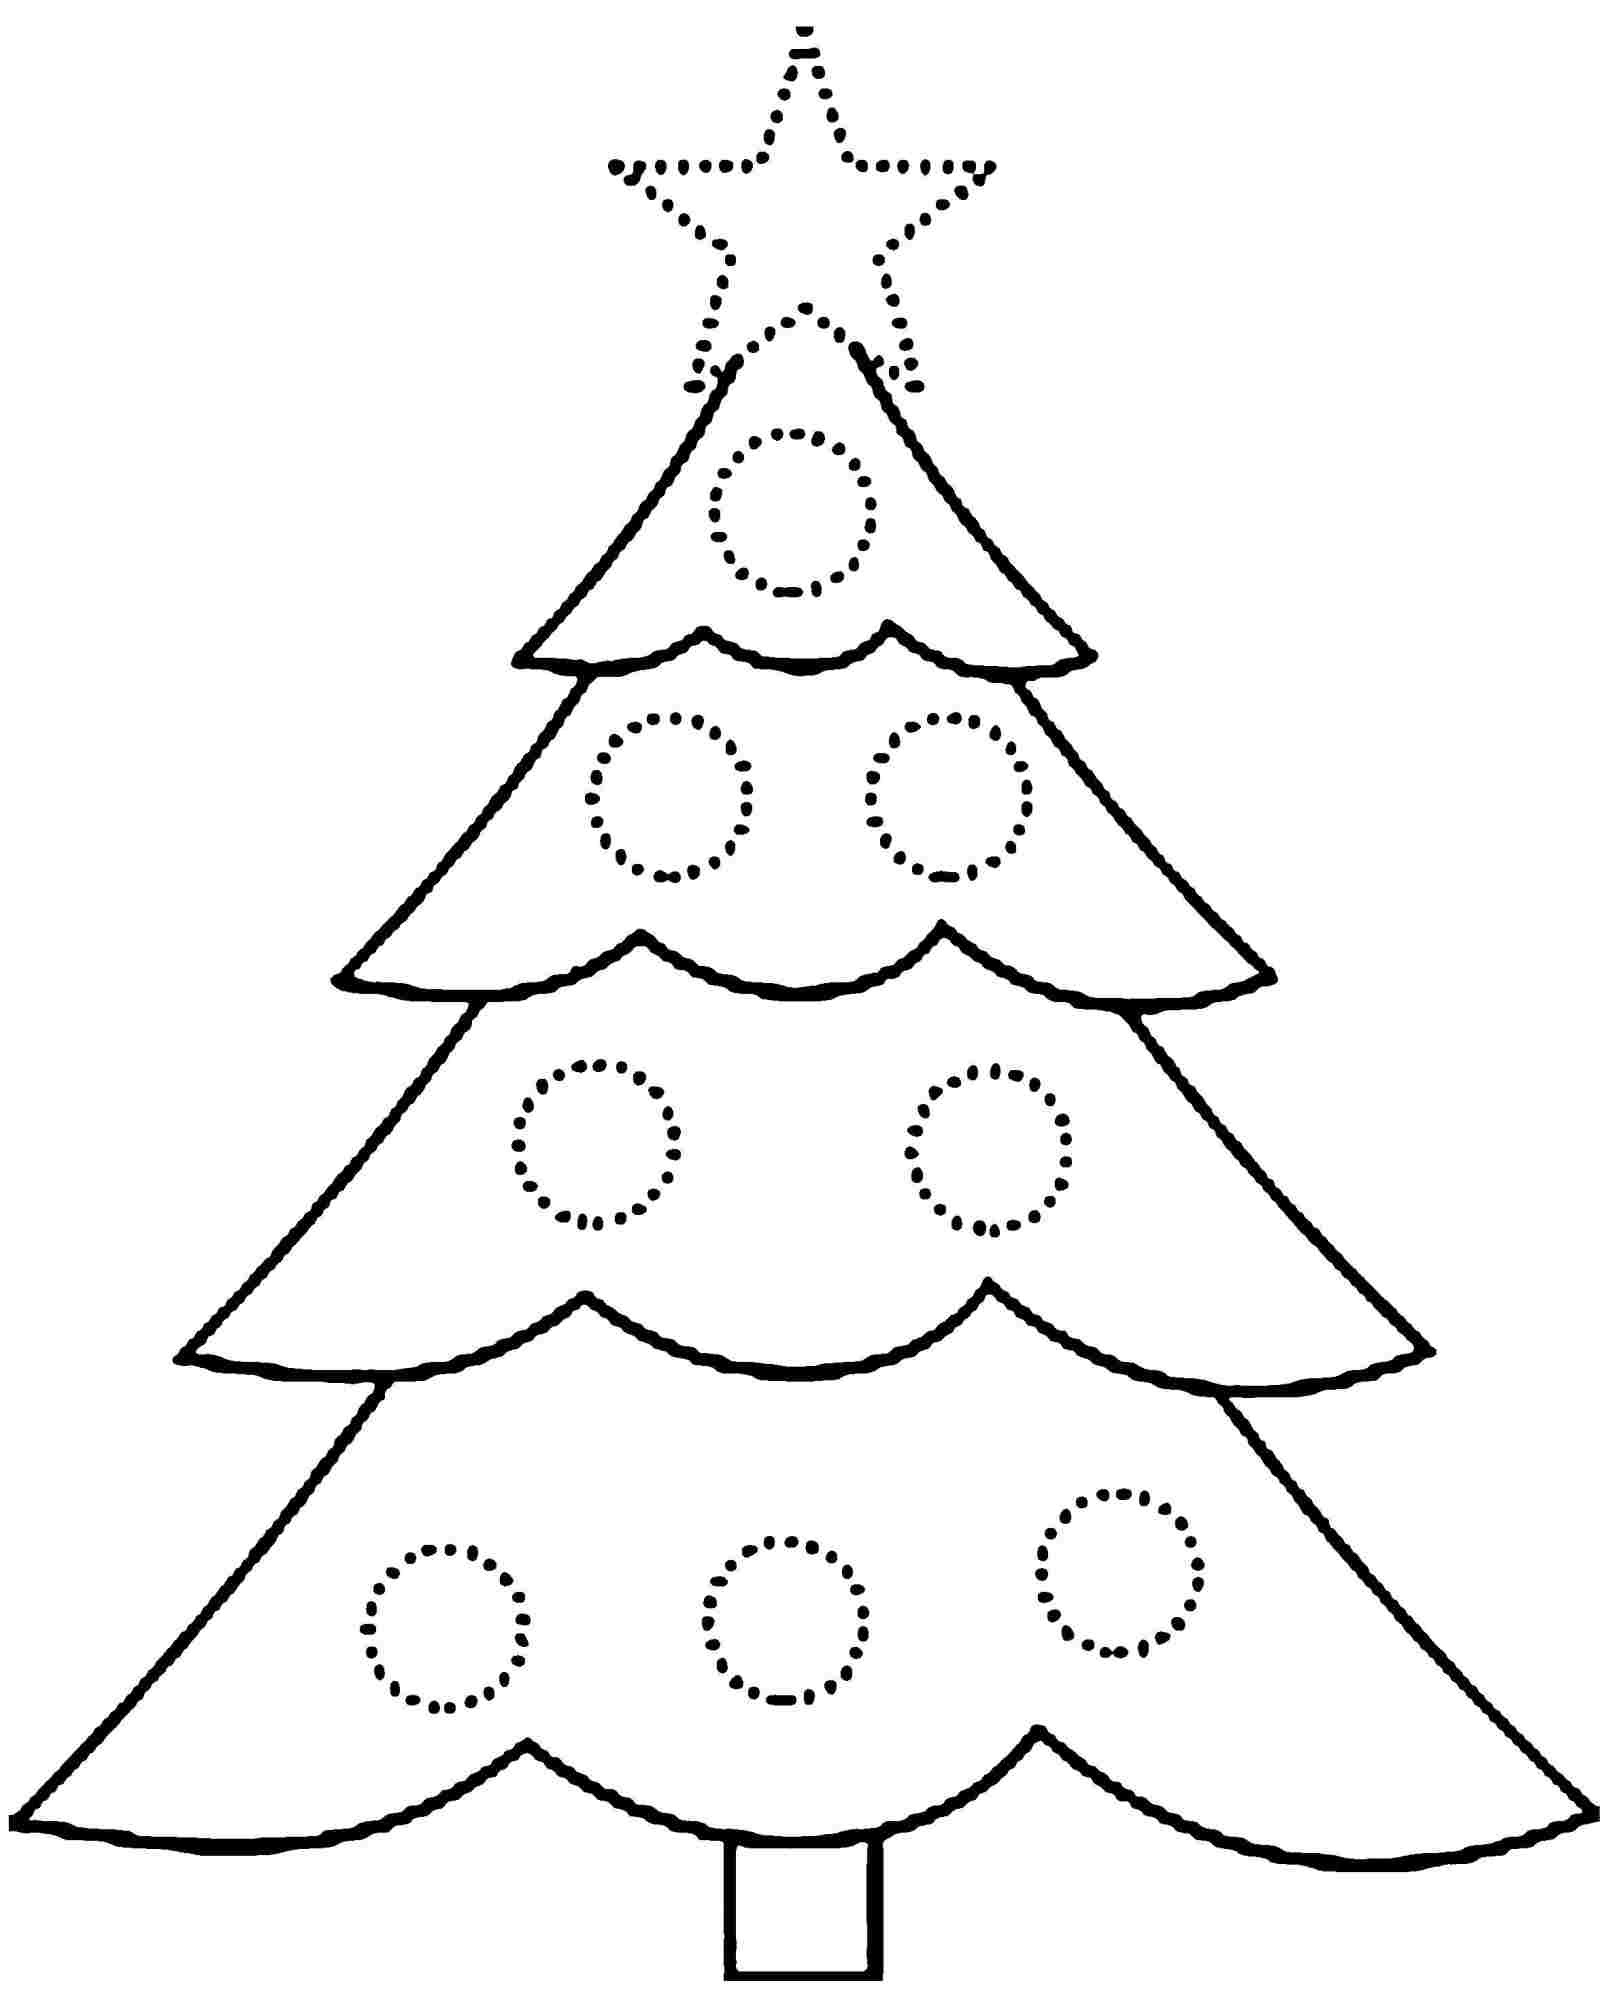 Printable Christmas Trees Coloring Pages Toddler
 Free Printable Christmas Tree Coloring Page Coloring Home